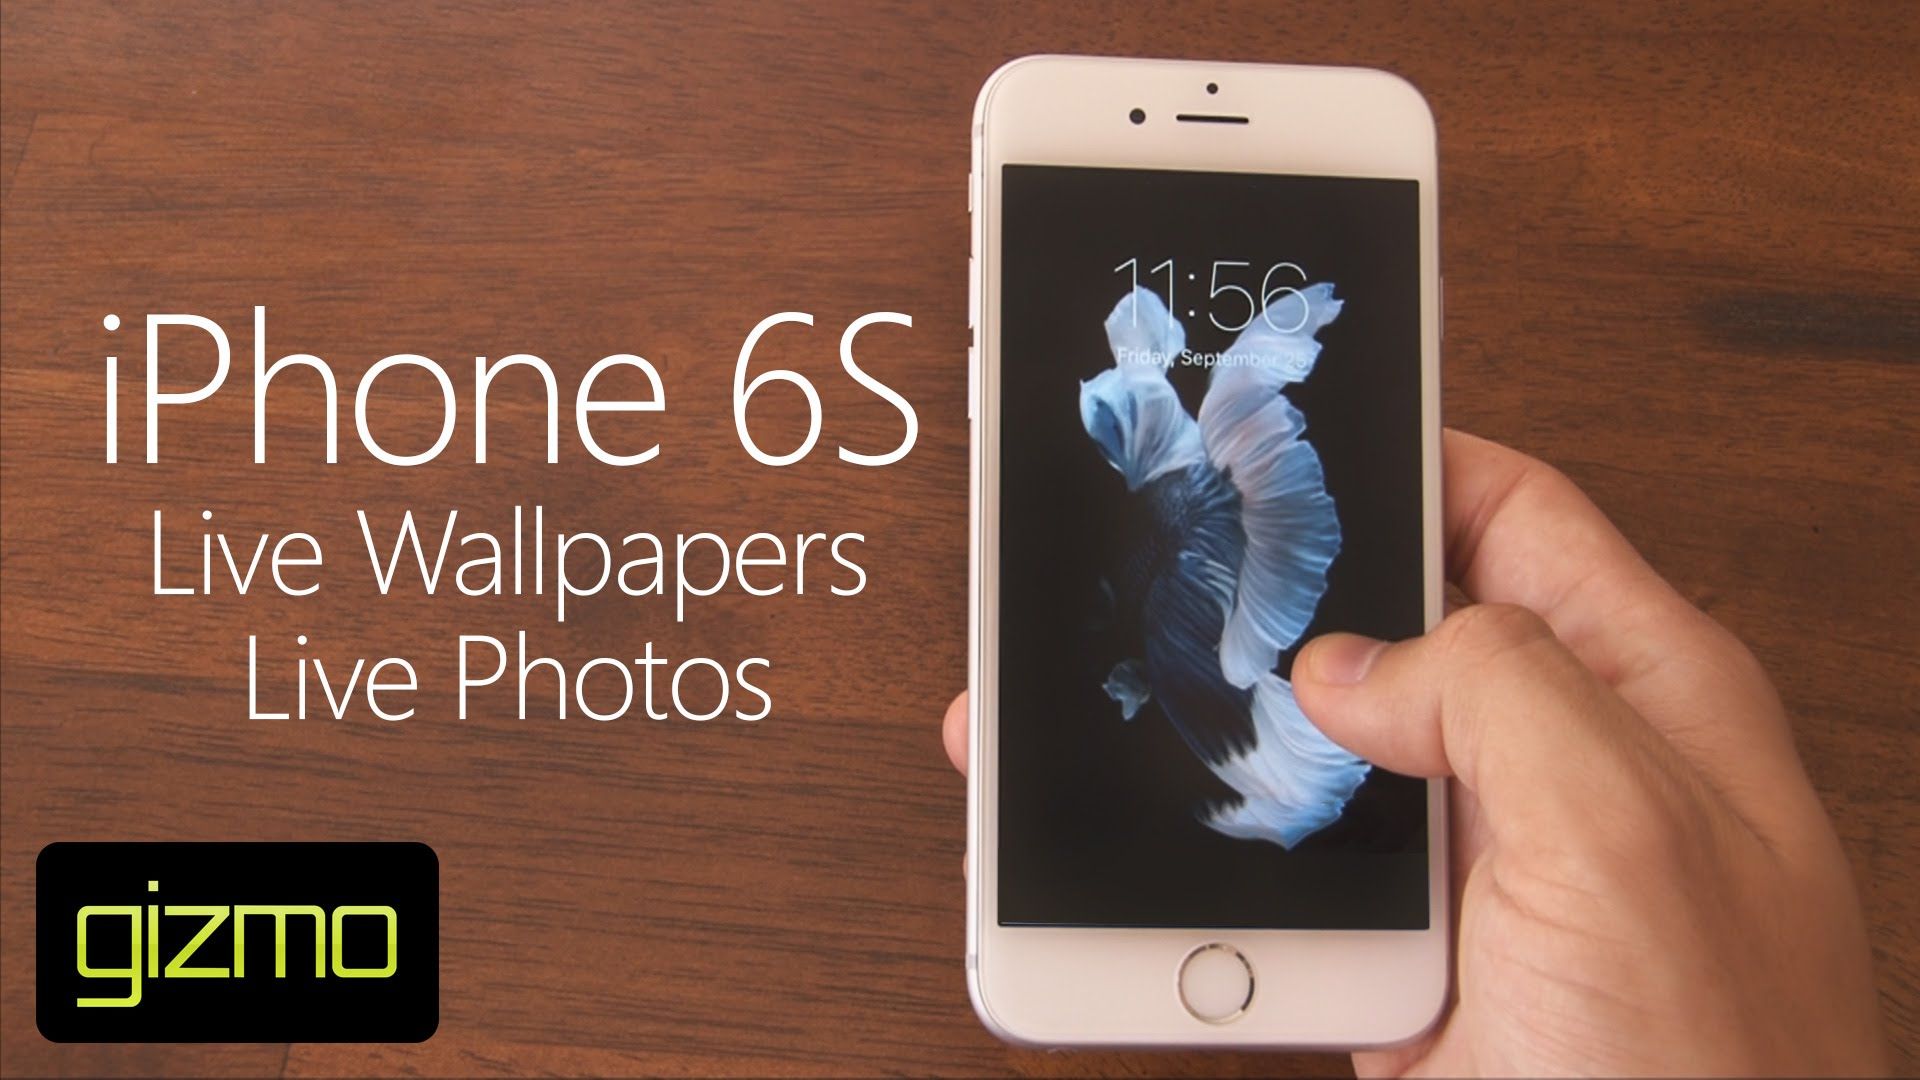 iPhone 6S - Live Wallpapers & Photos - YouTube